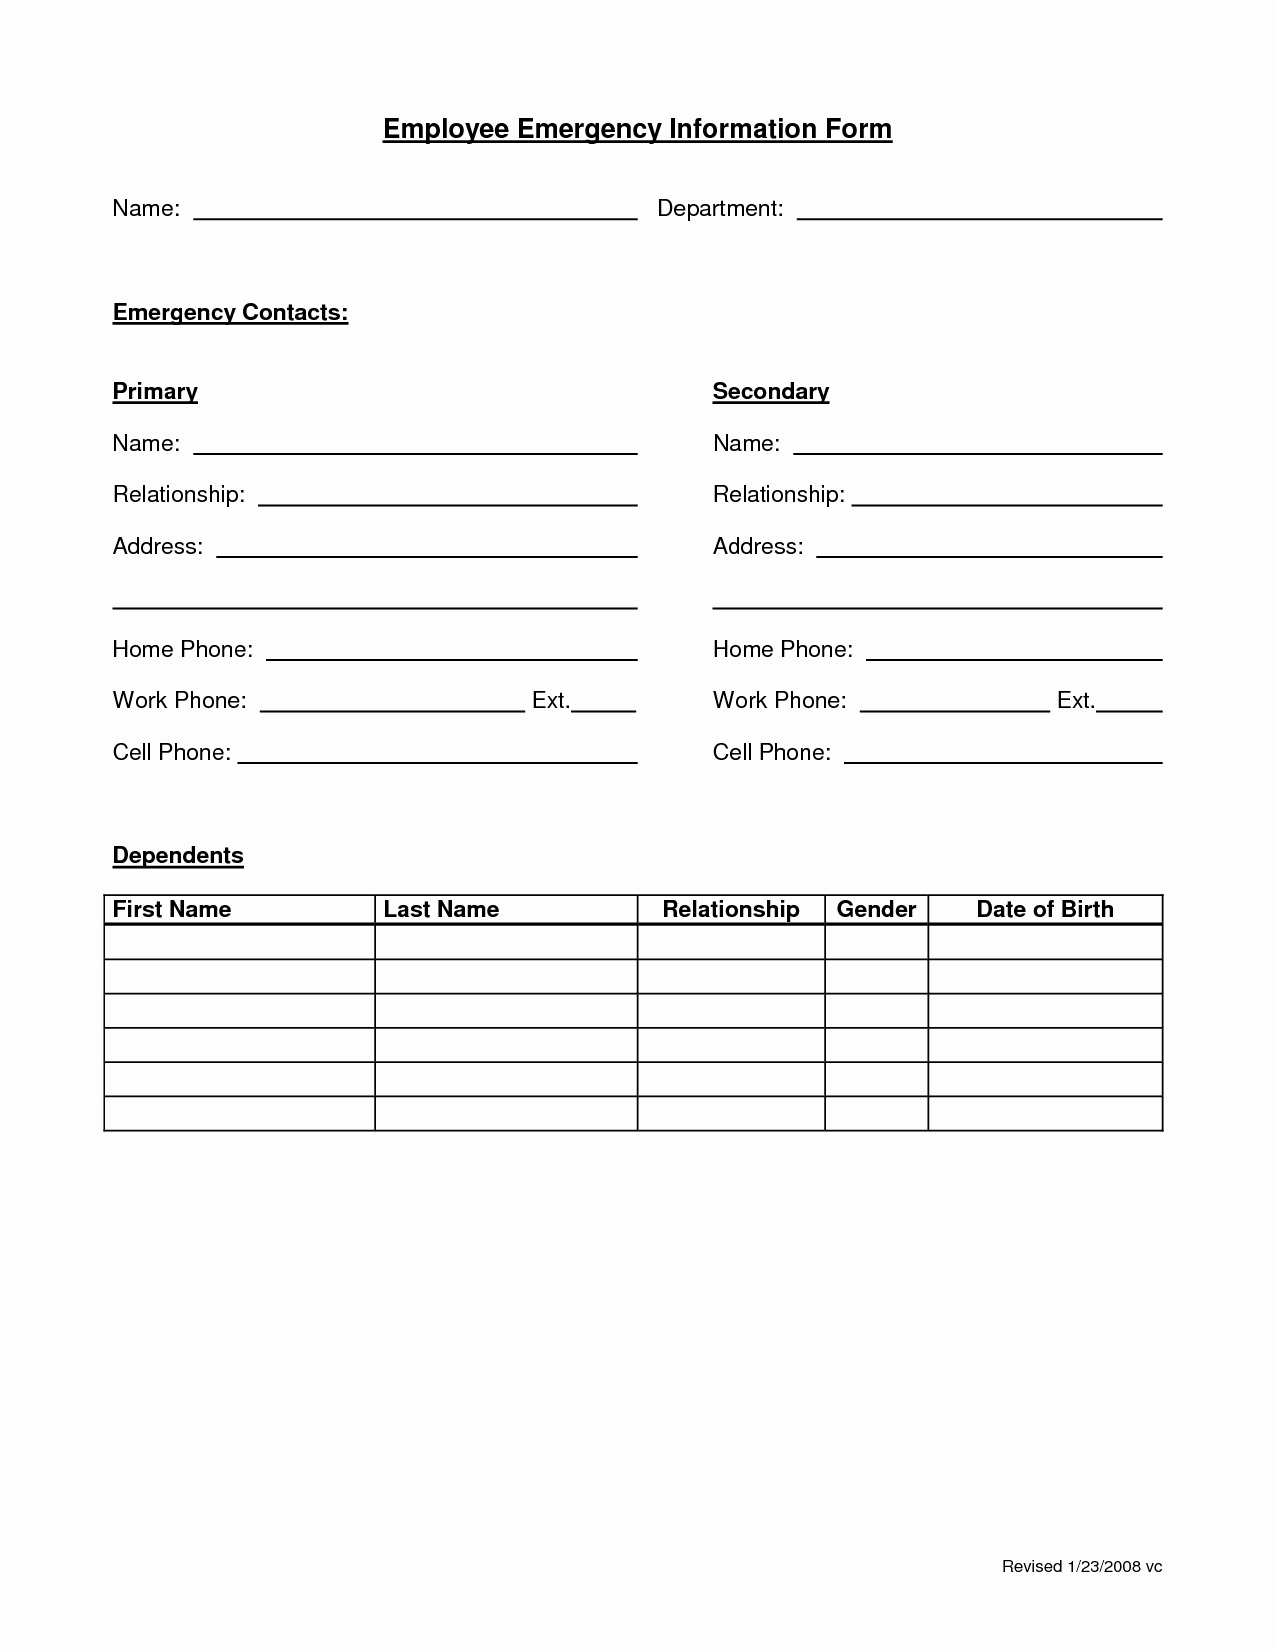 Emergency Contact form Template Unique Employee Emergency form